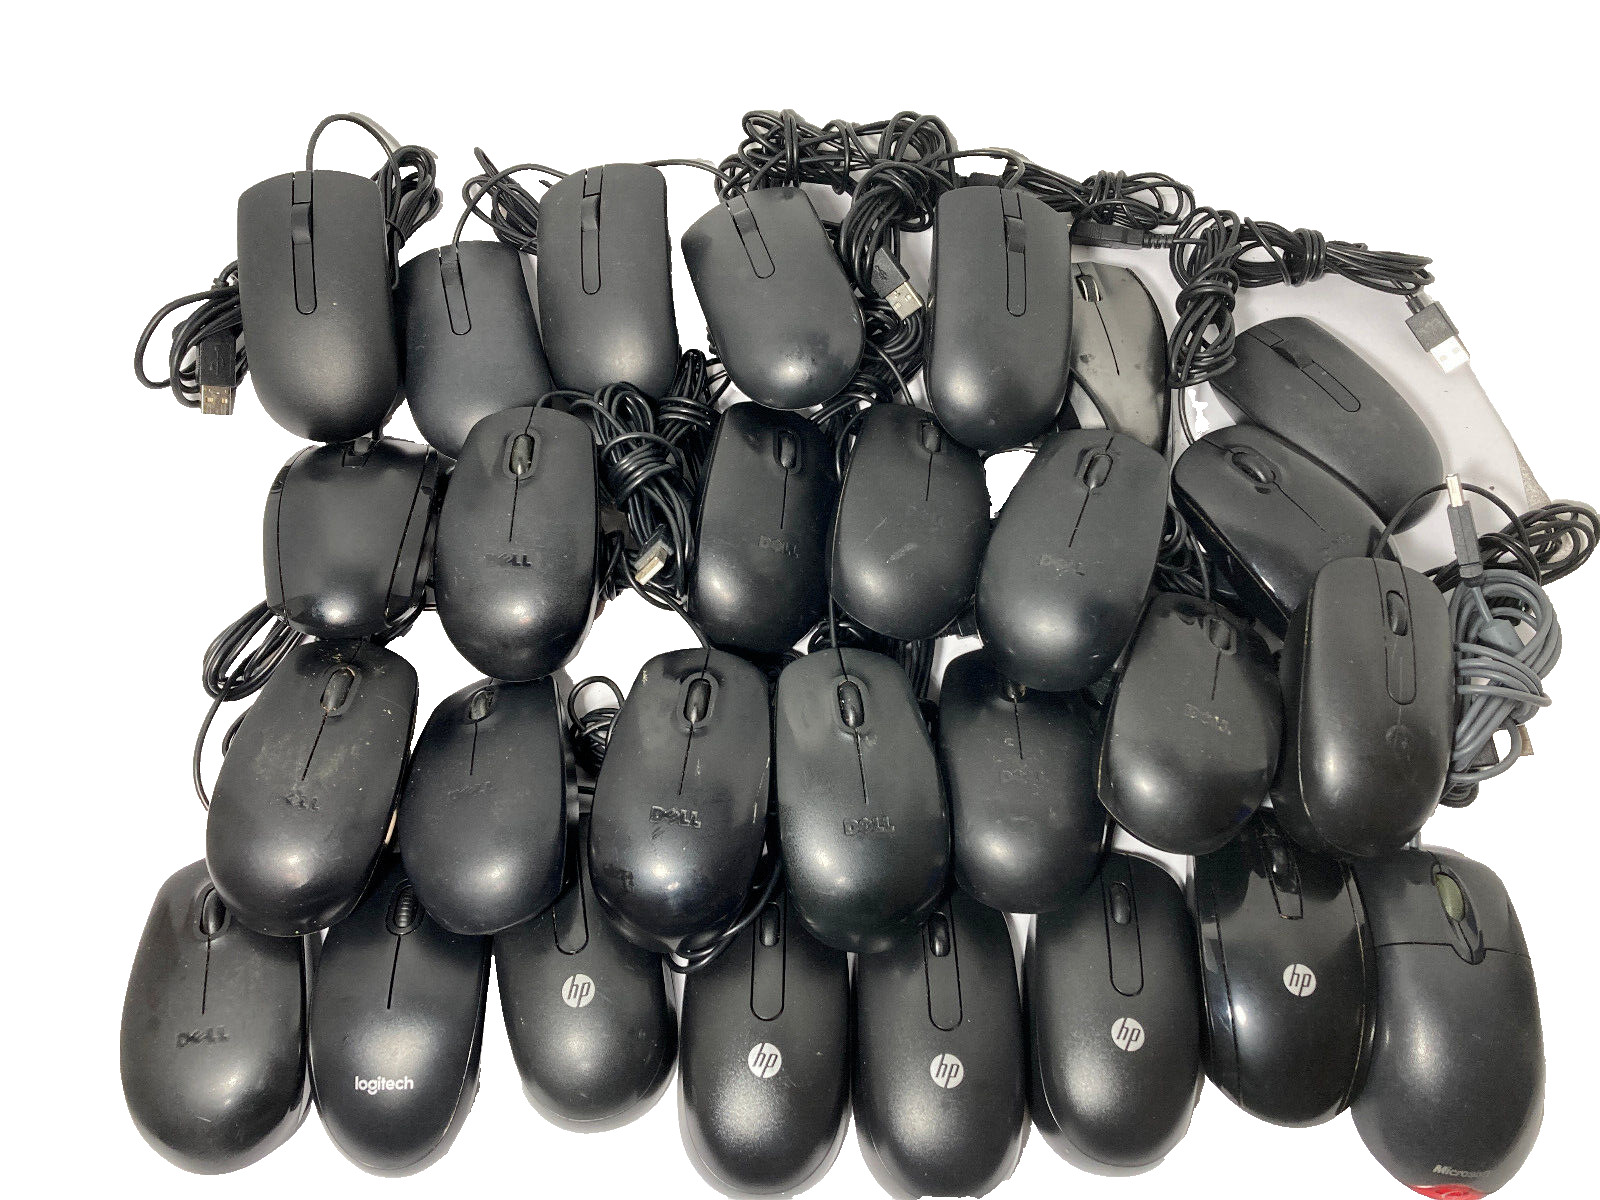 Lot of 28 Optical USB Mouse Mice Black Mixed Brand HP Logitech Dell Microsoft